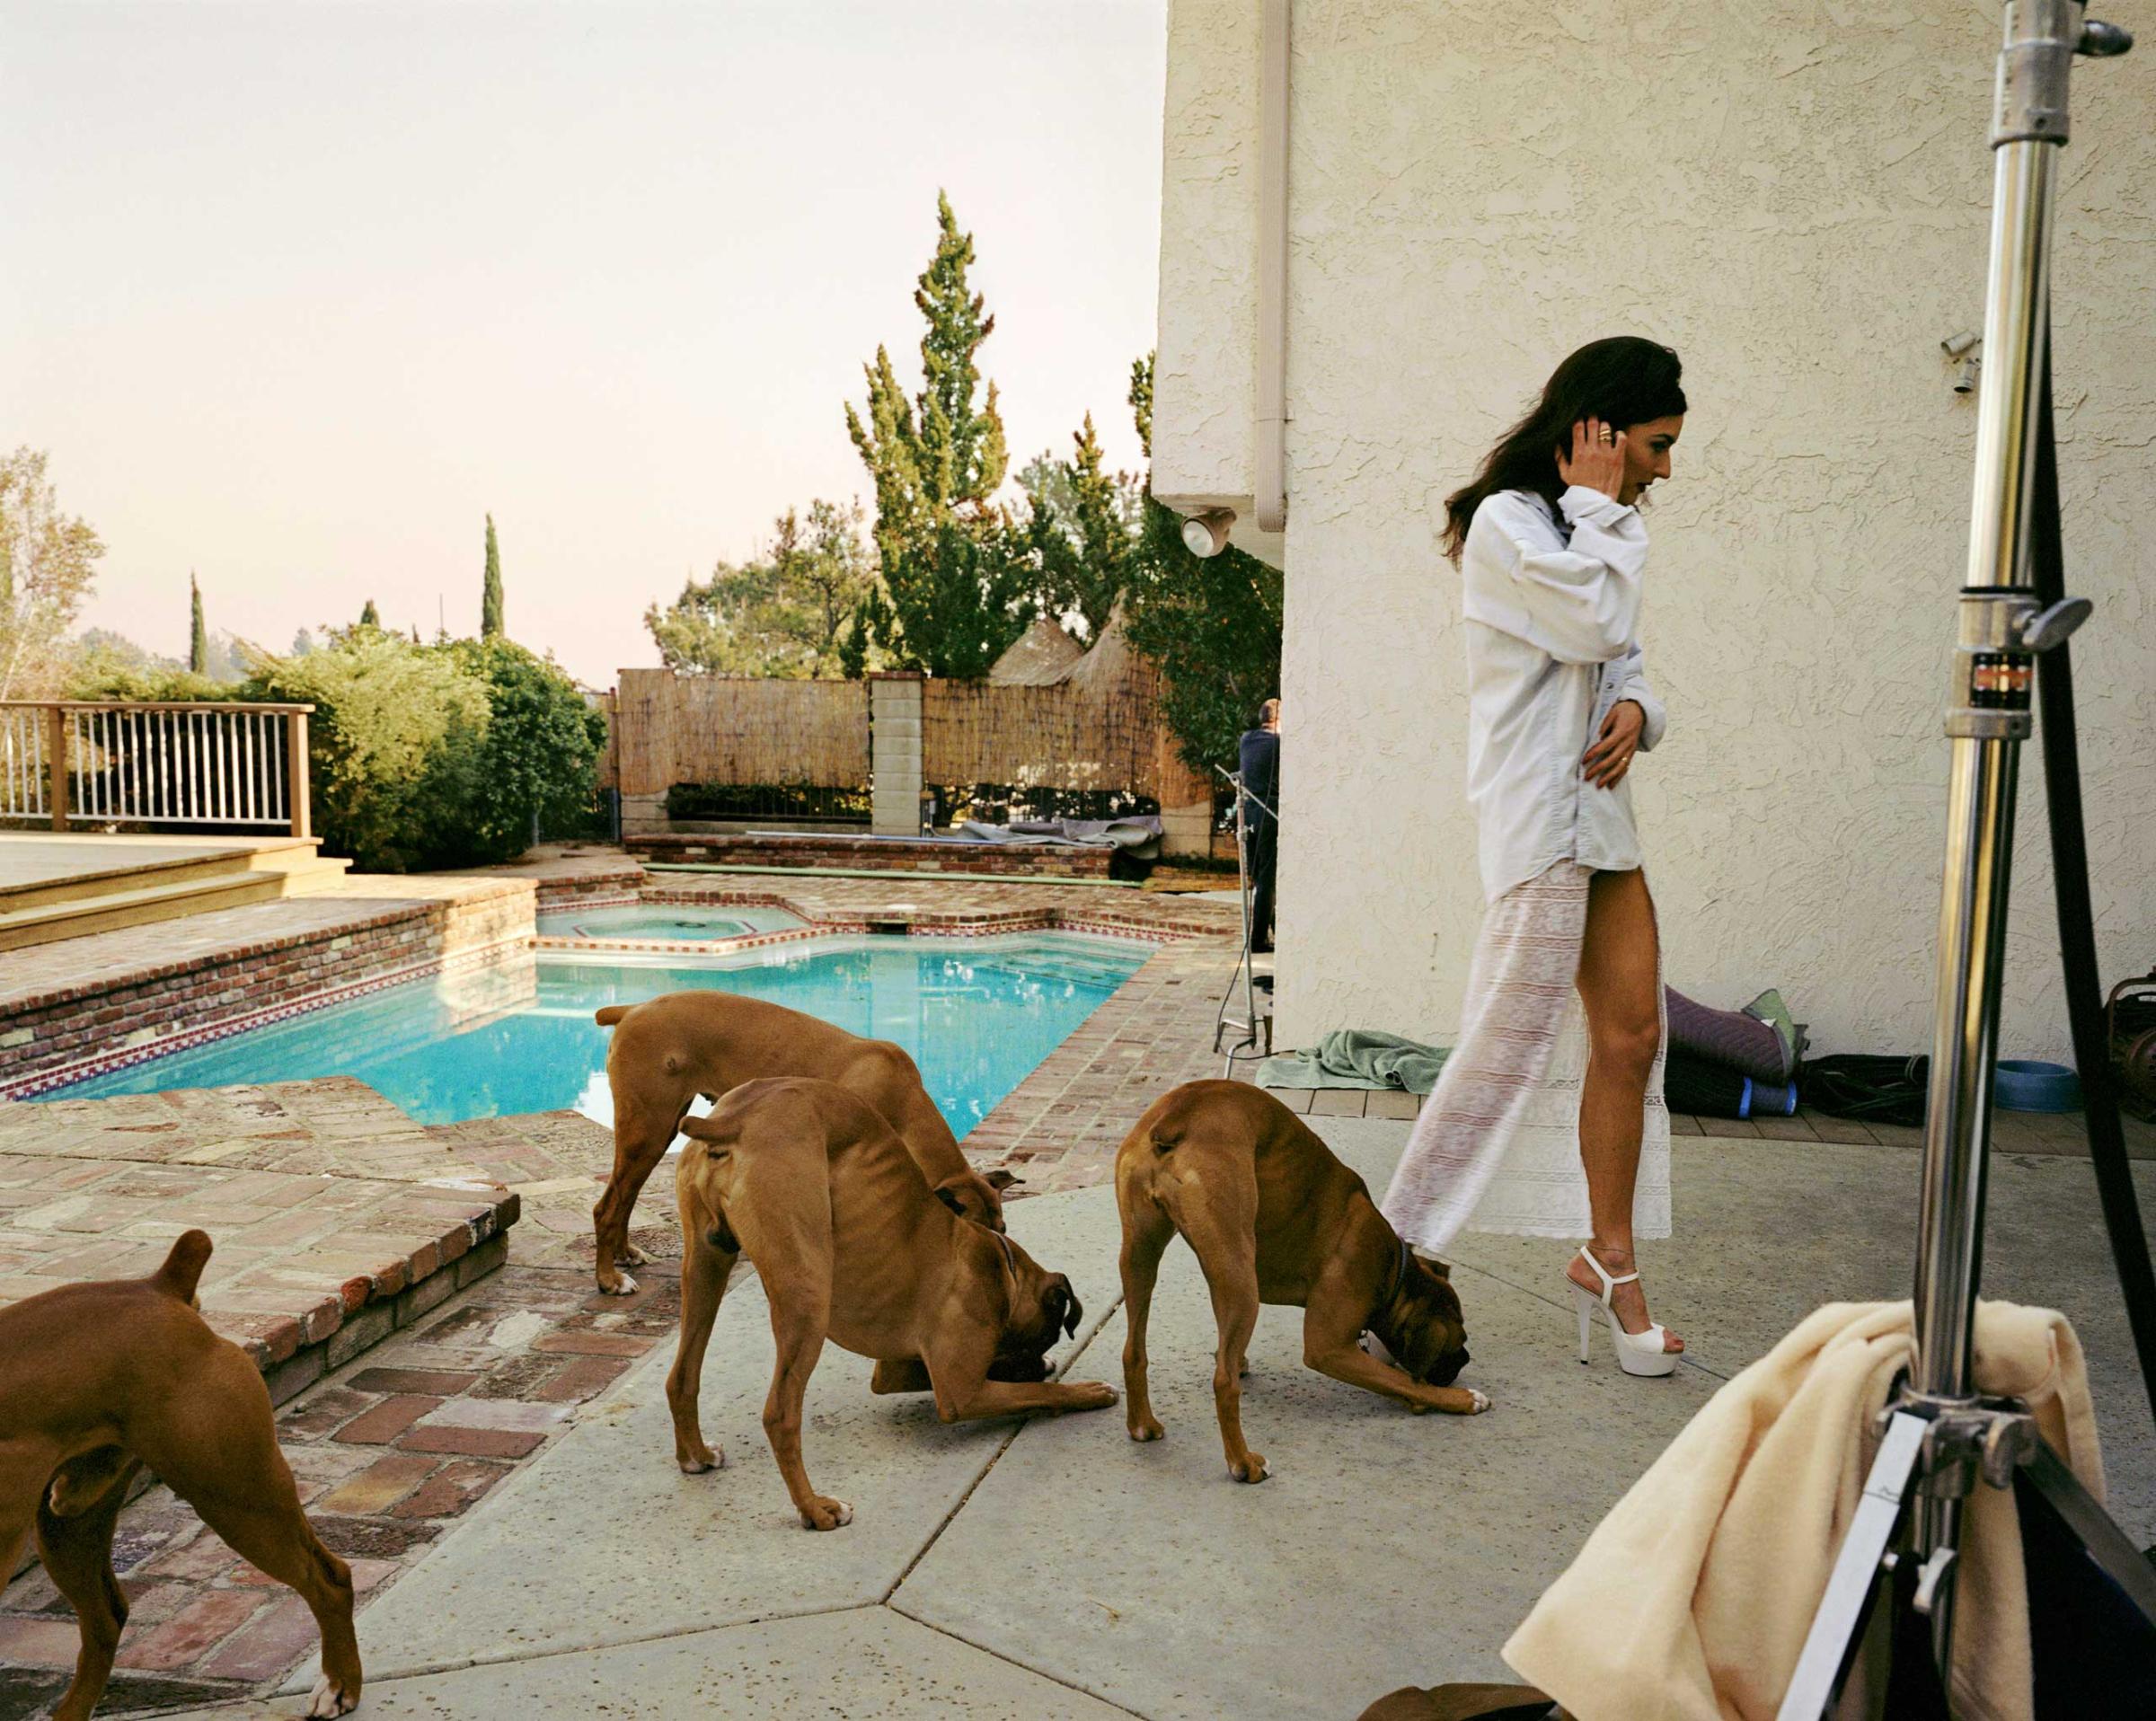 Boxers, Mission Hills, 1999, from the series The Valley